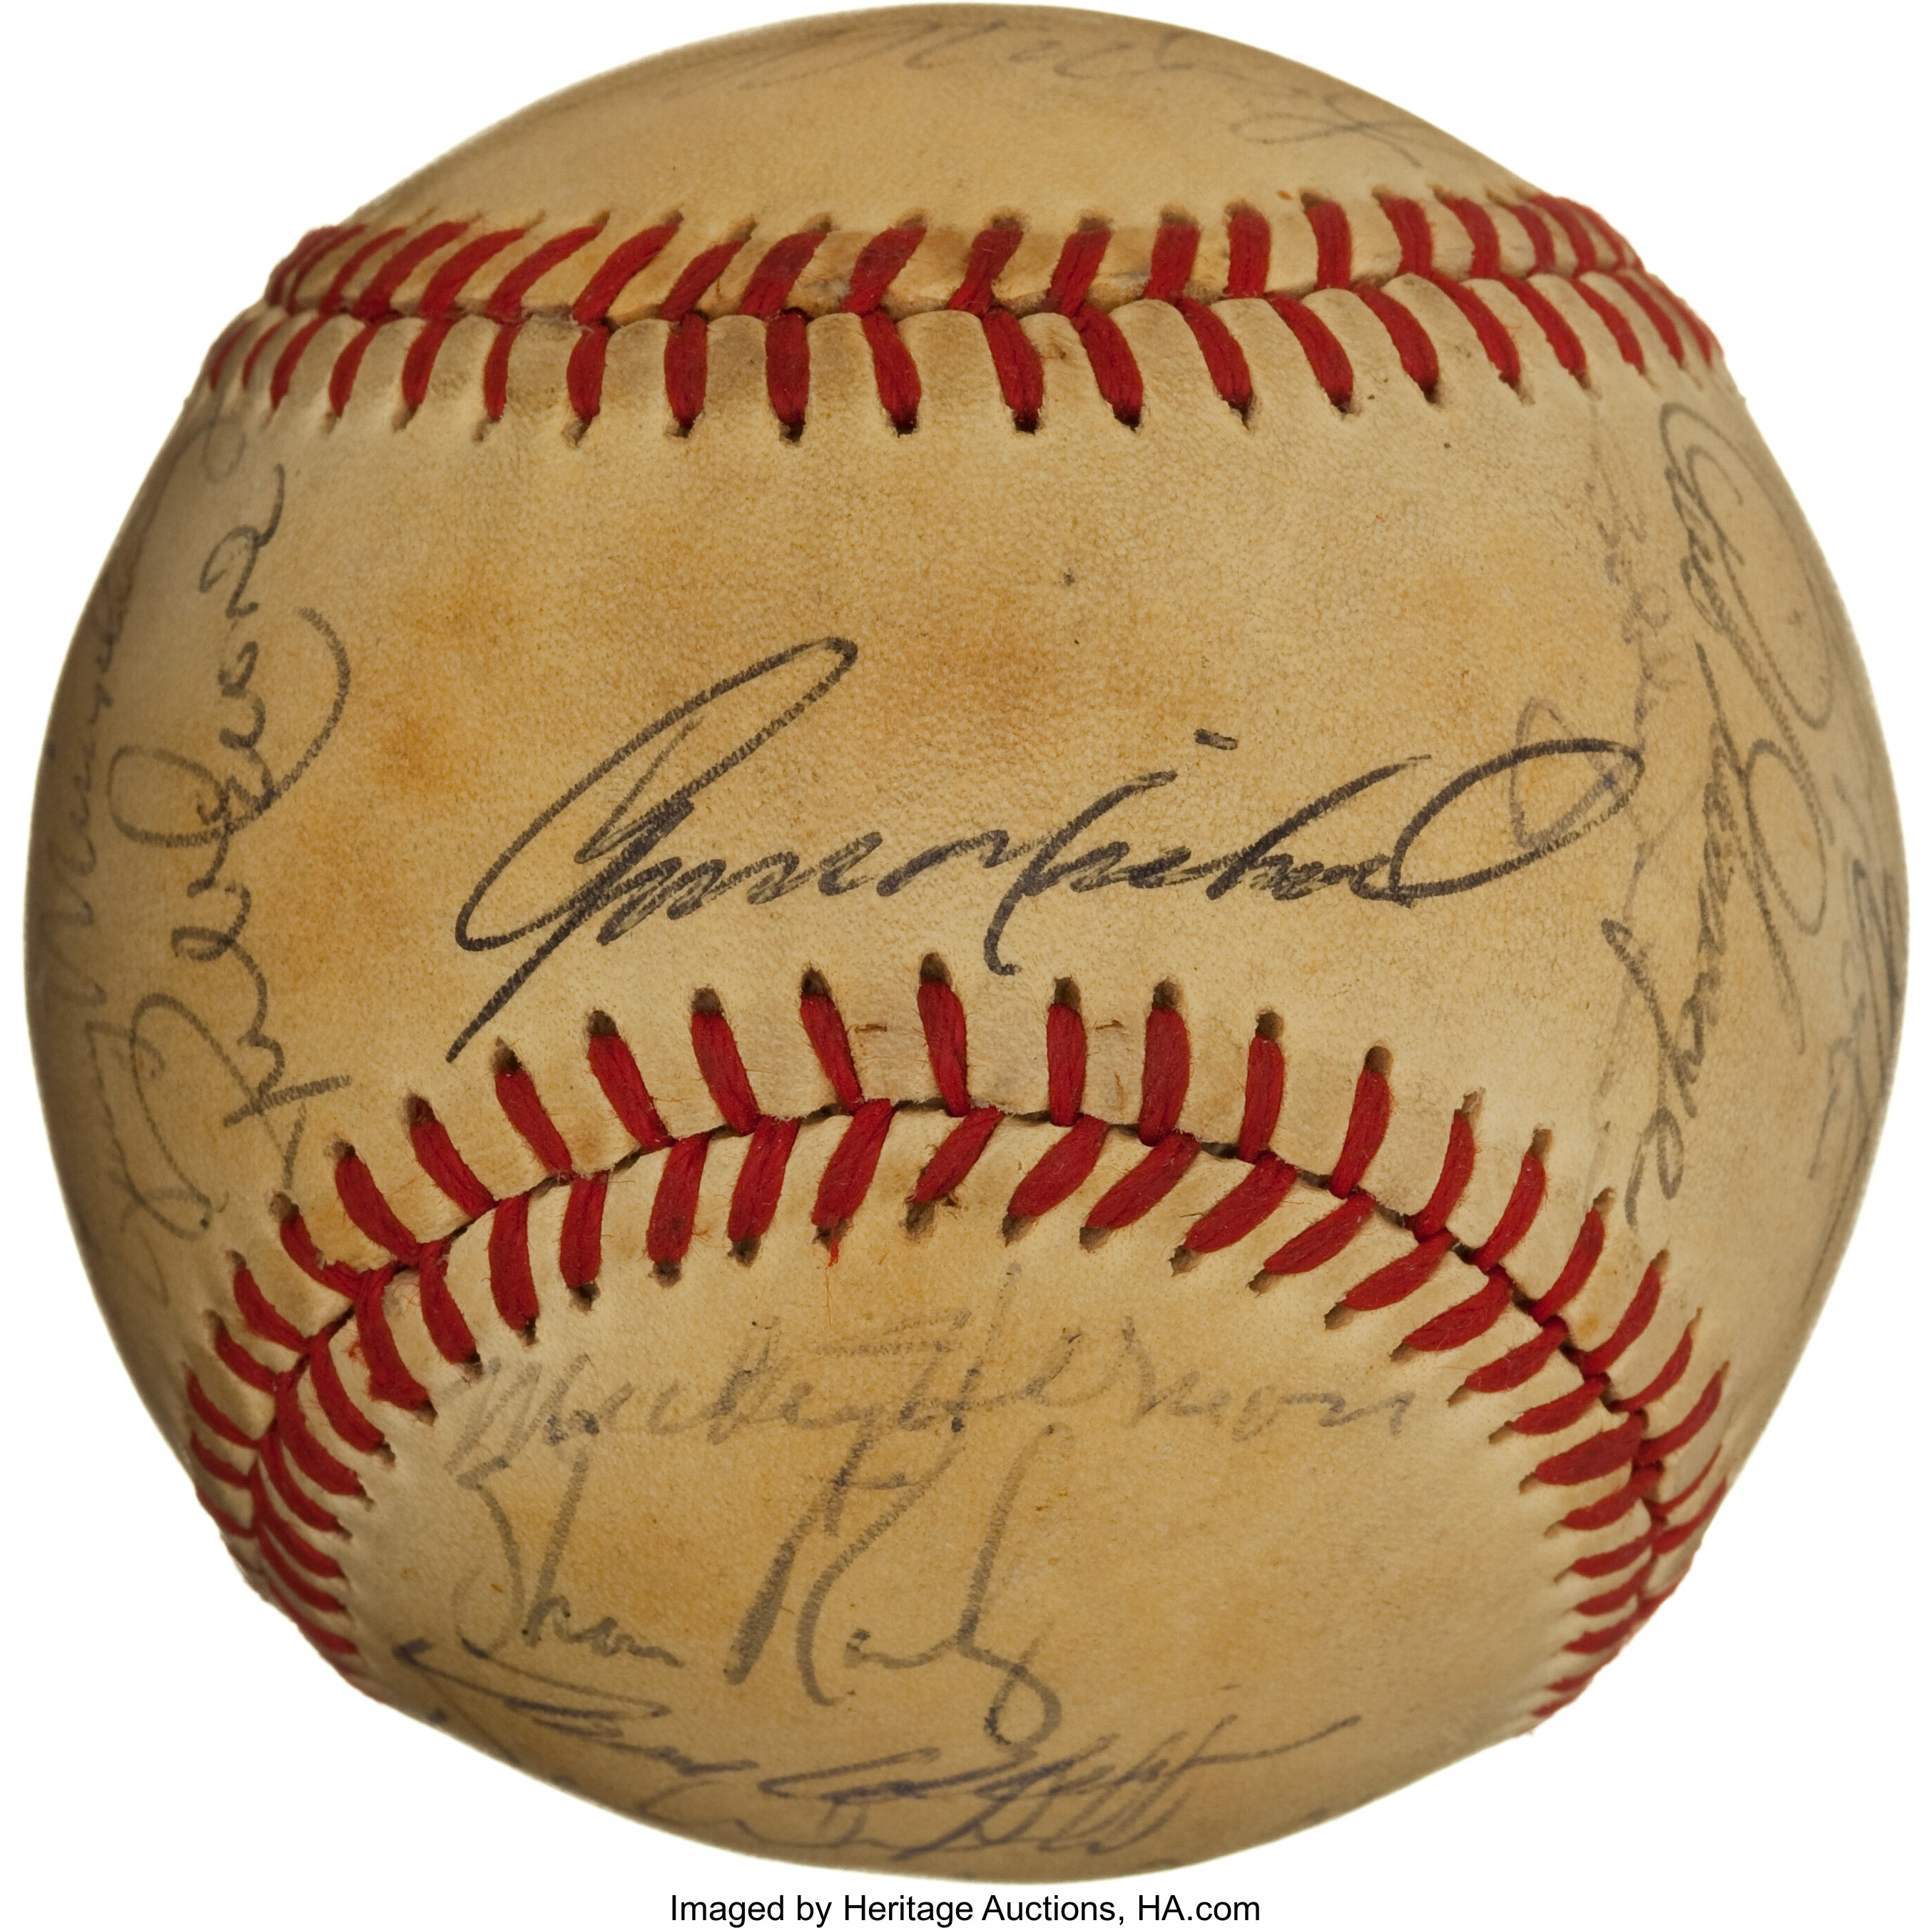 BOBBY MURCER & LOU PINIELLA SIGNED AUTOGRAPHED OAL MACPHAIL BASEBALL!  Yankees!